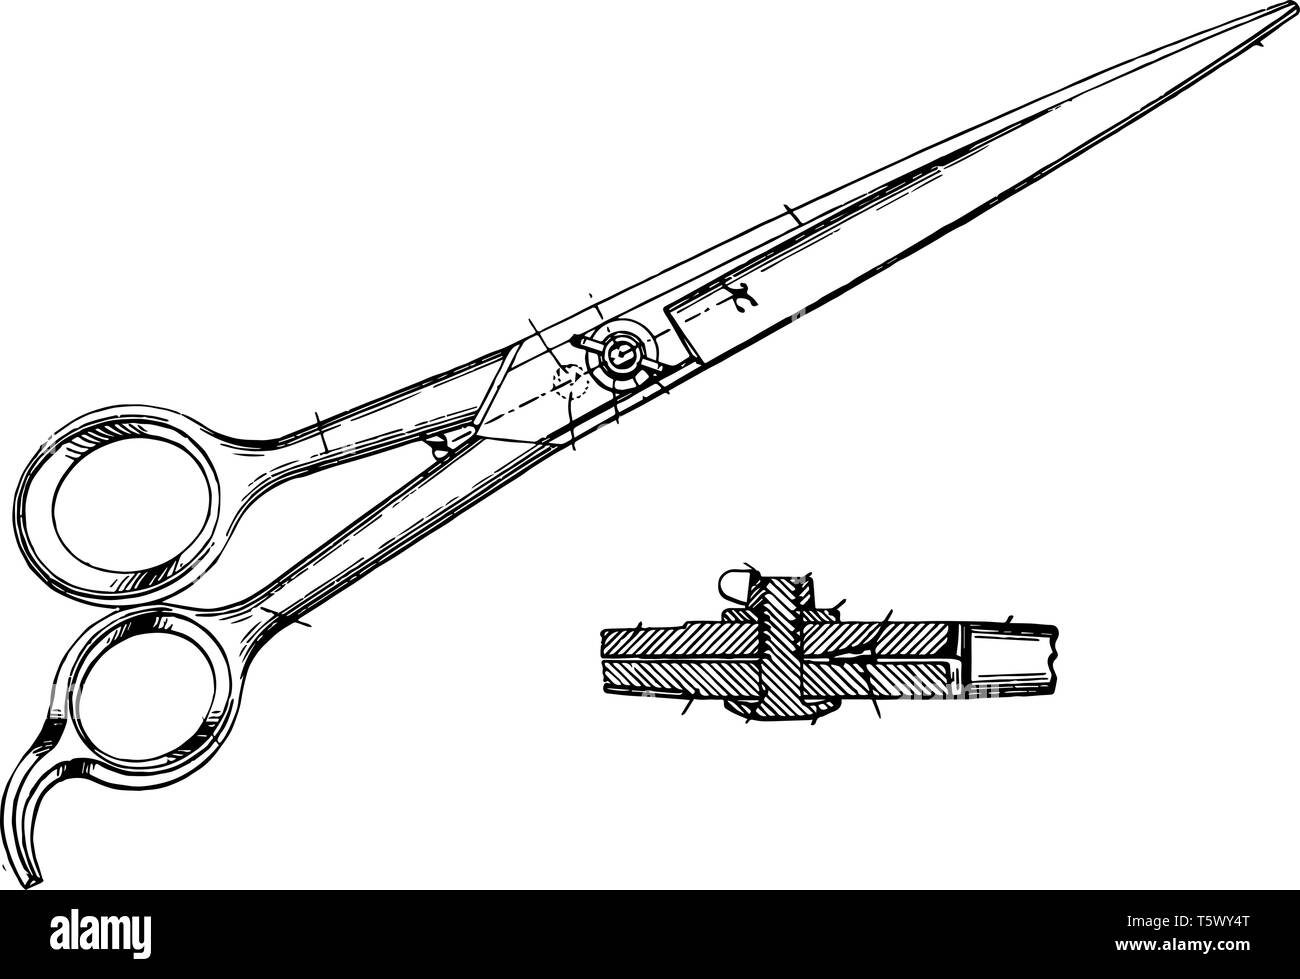 This illustration represents Large Scale Scissors which consist of a pair of metal blades vintage line drawing or engraving illustration. Stock Vector